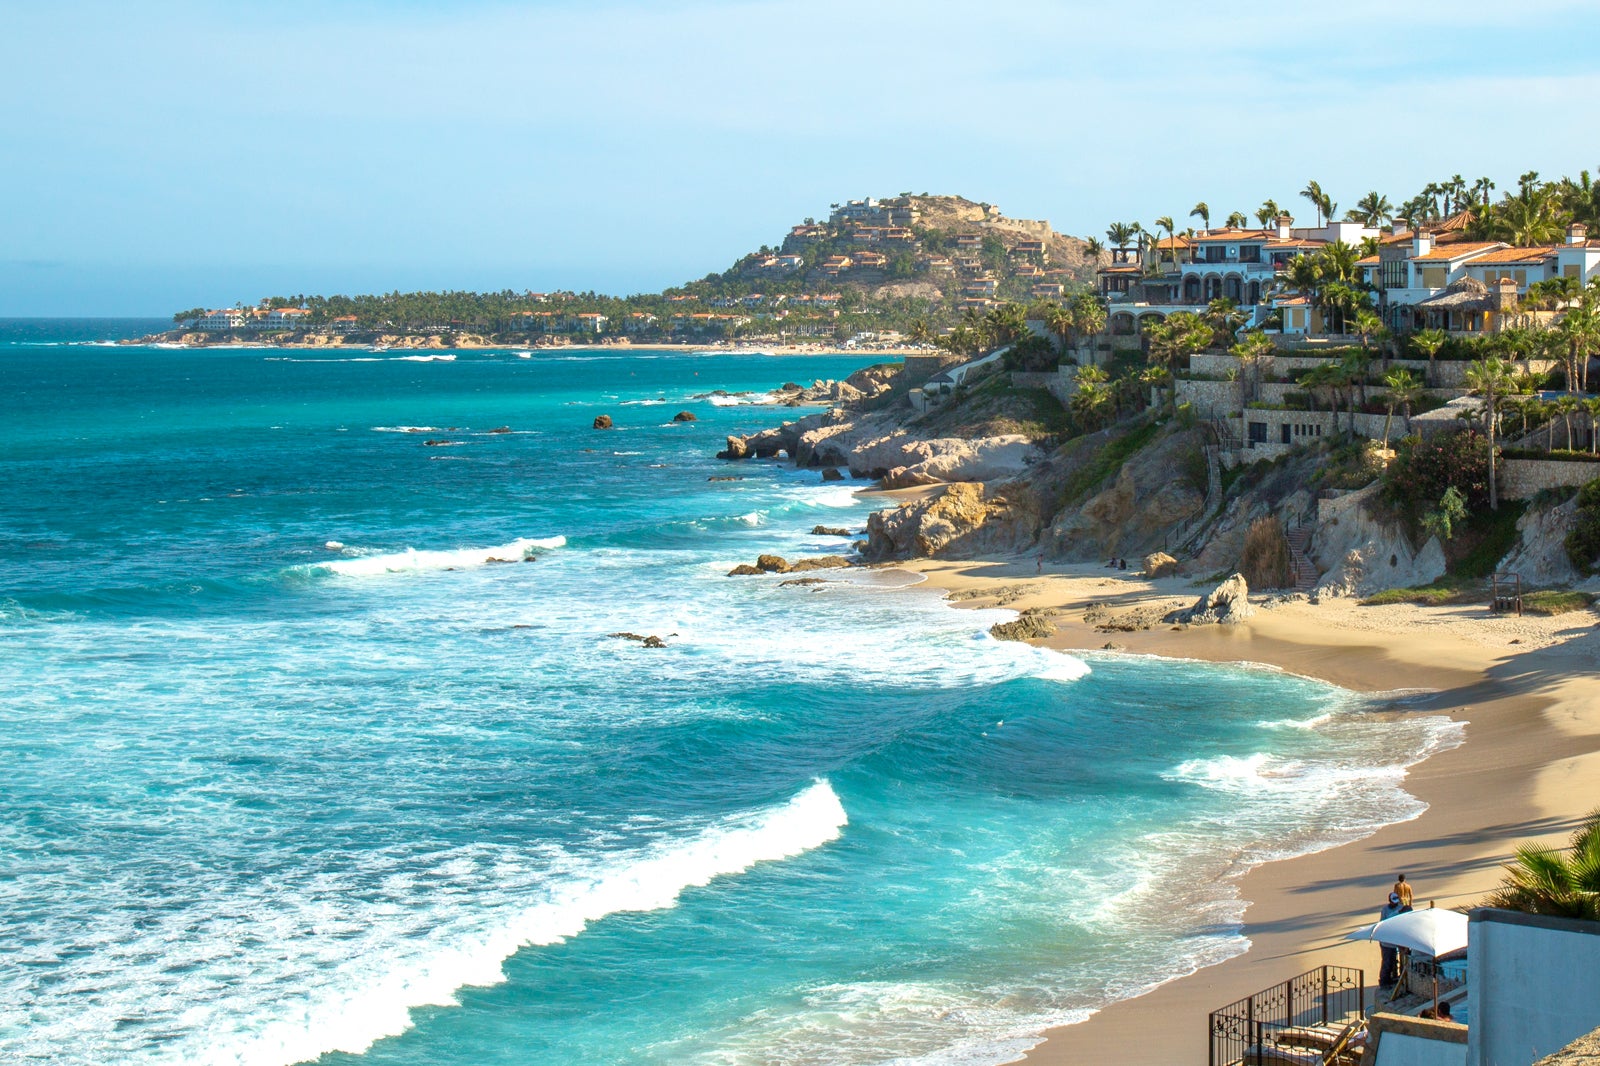 A list of the 5 things you should not do in Cabo San Lucas.